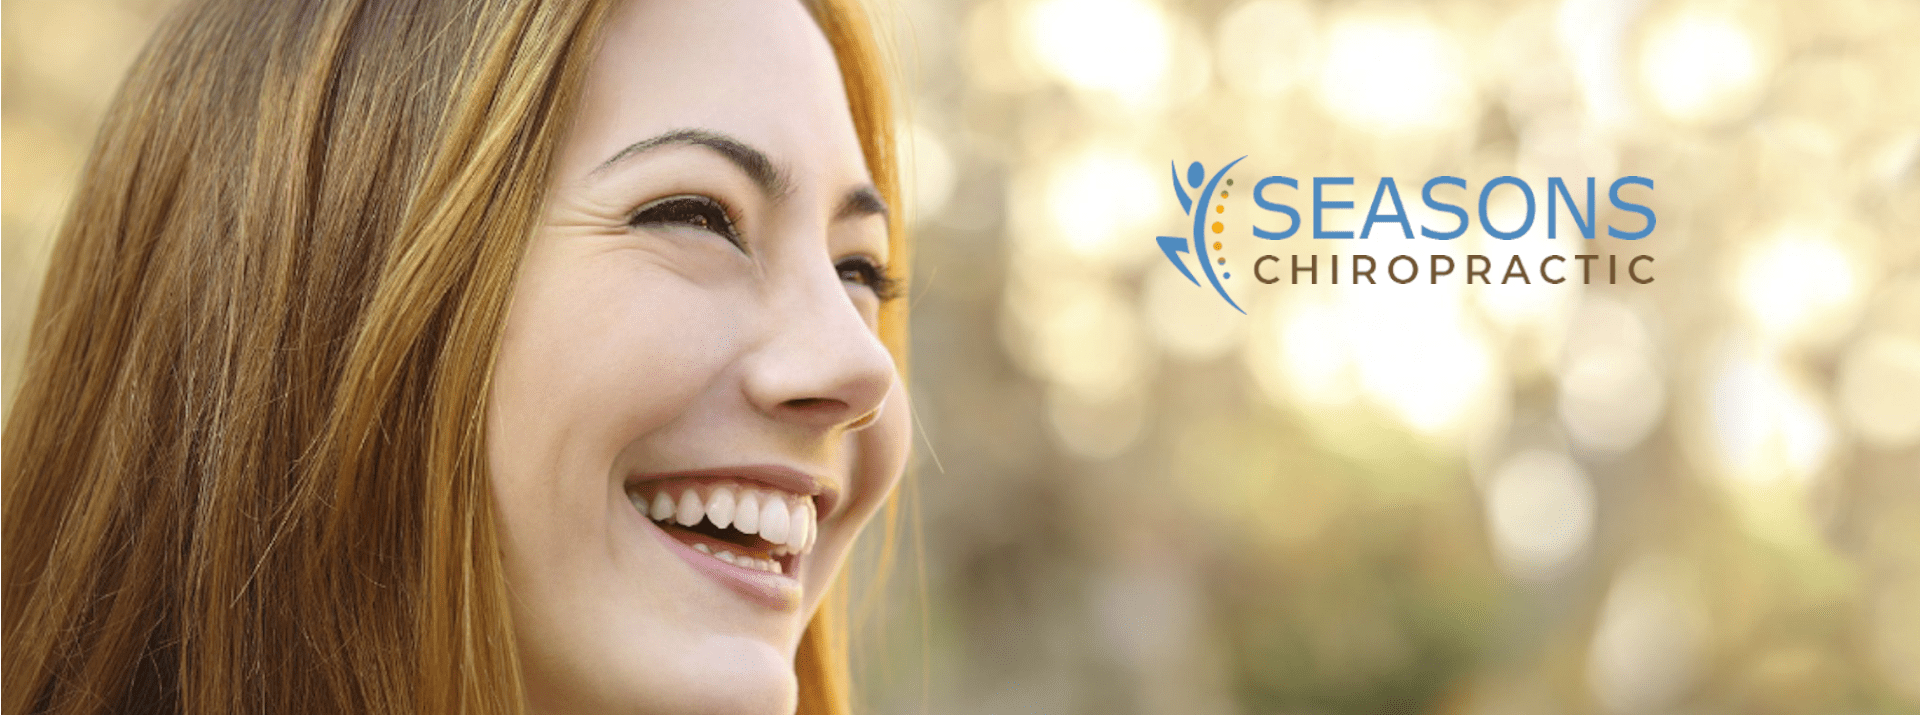 Image: Resilient Recovery - A delighted woman focuses on the Seasons Chiropractic logo, symbolizing strength, joy, and successful recovery from car accidents.